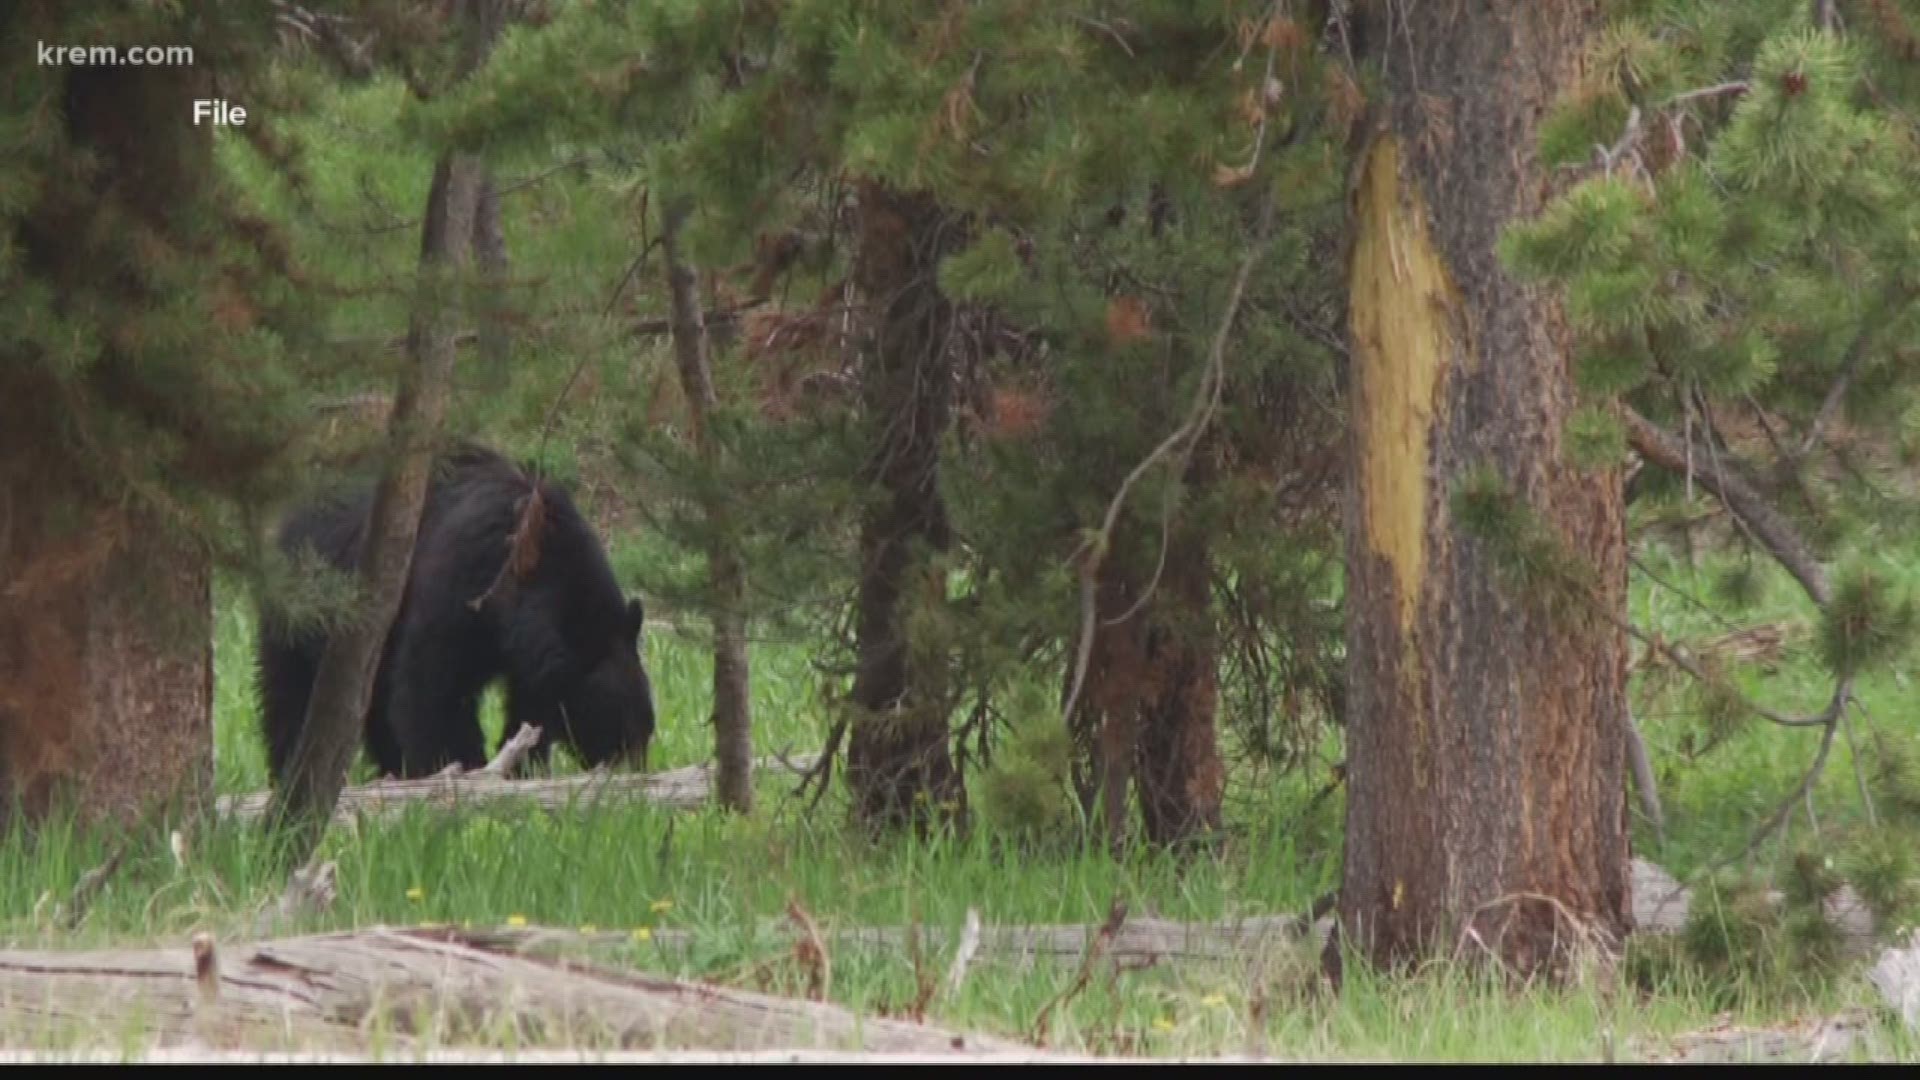 The bears were spotted at Iller Creek within Dishman Hills Conservation Area, according to Spokane County Parks and Recreation.